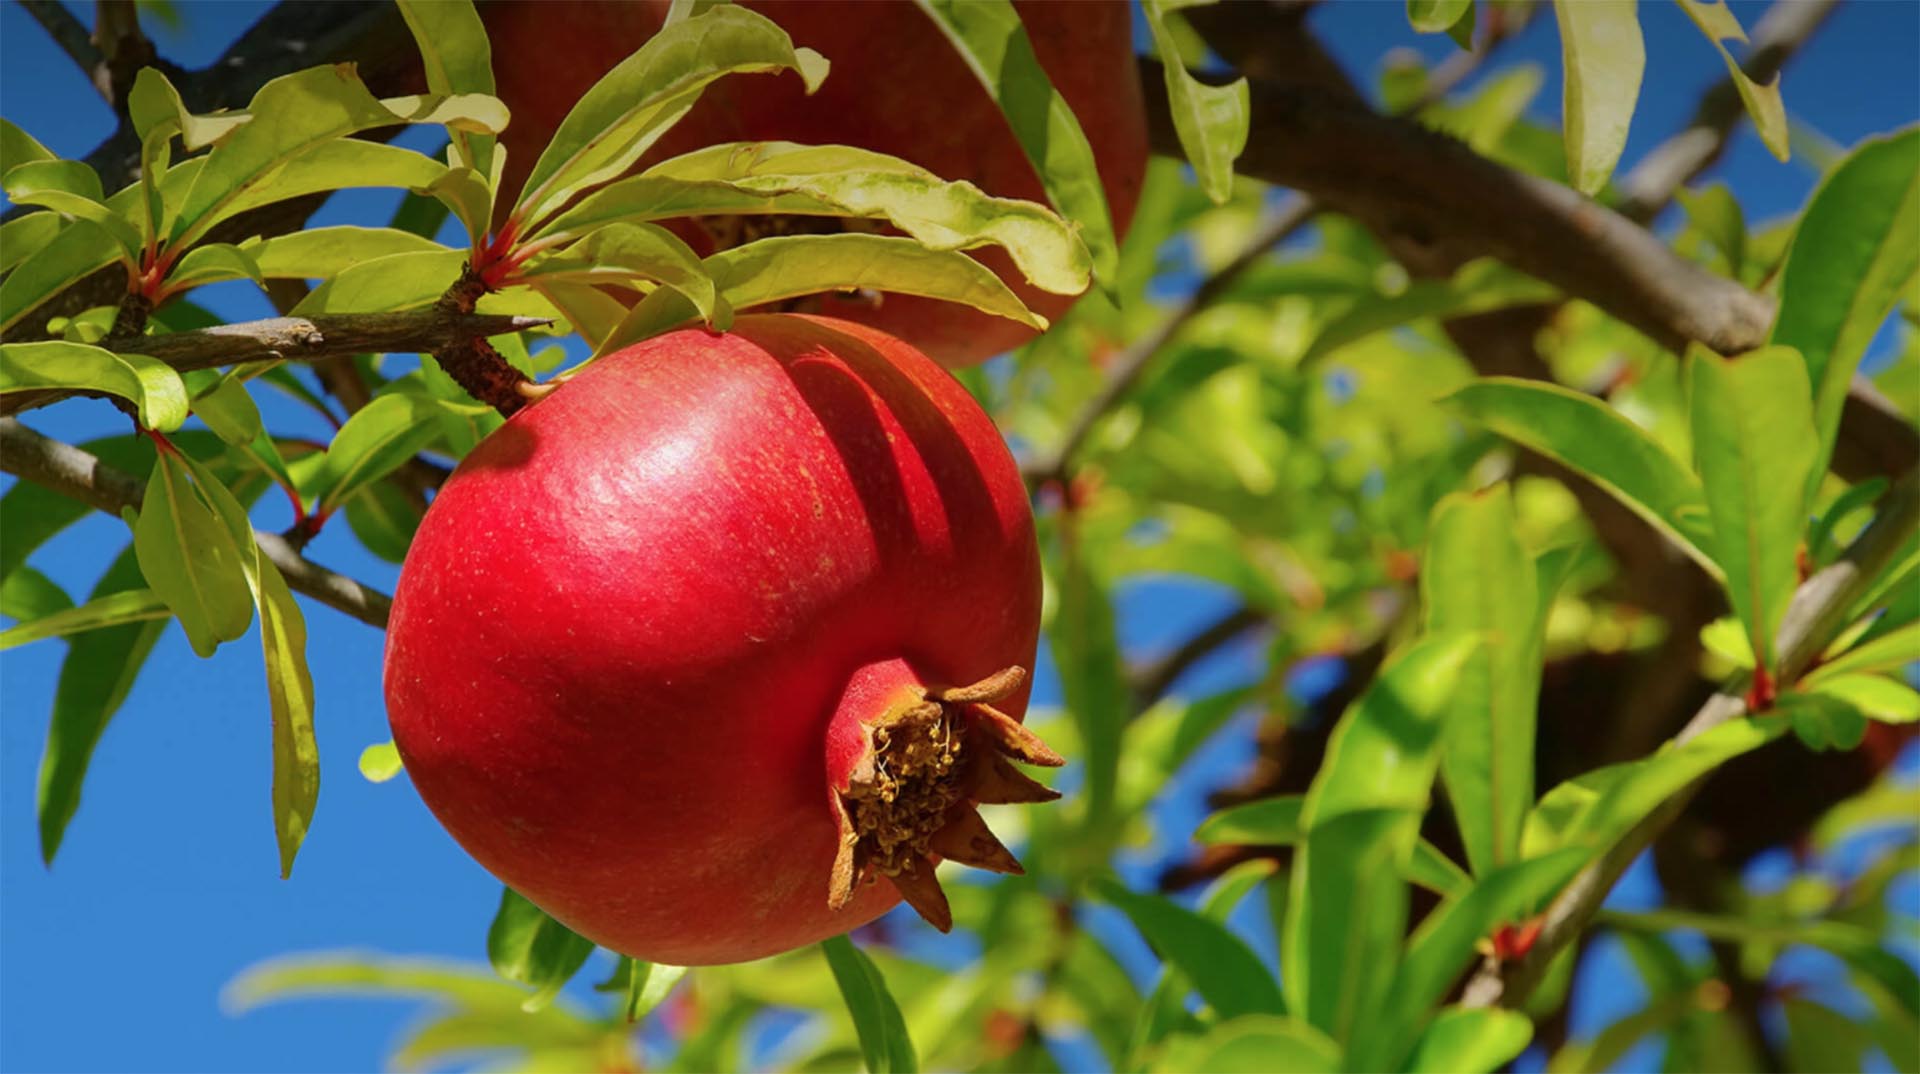 Large red pomegranate fruit growing on tree